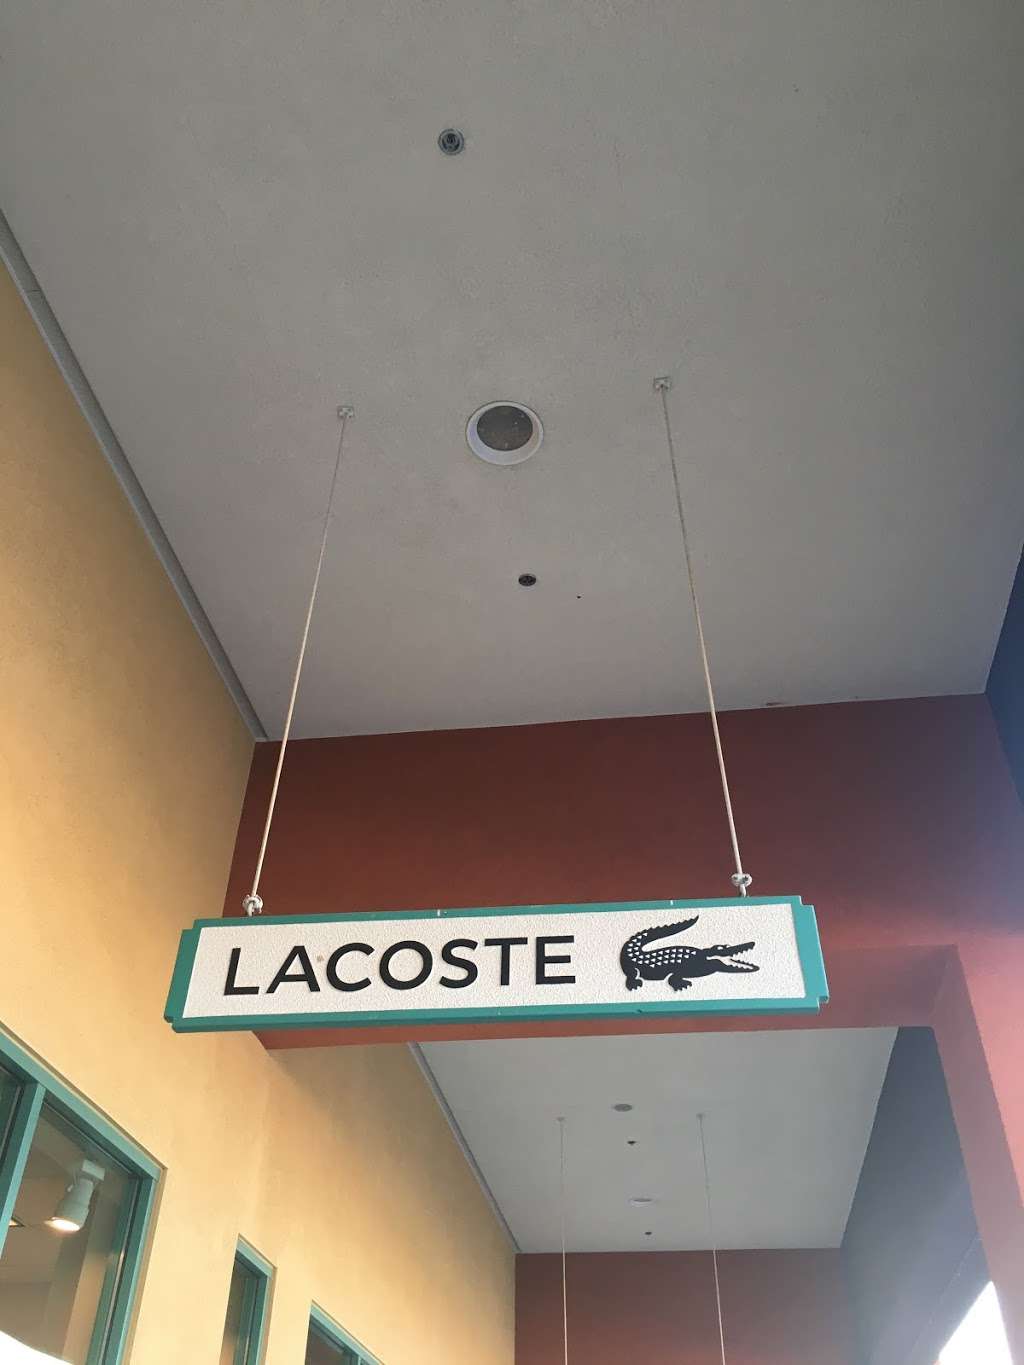 Lacoste | 2796 Tanger Way Suite 335, Barstow, CA 92311 | Phone: (760) 253-7591